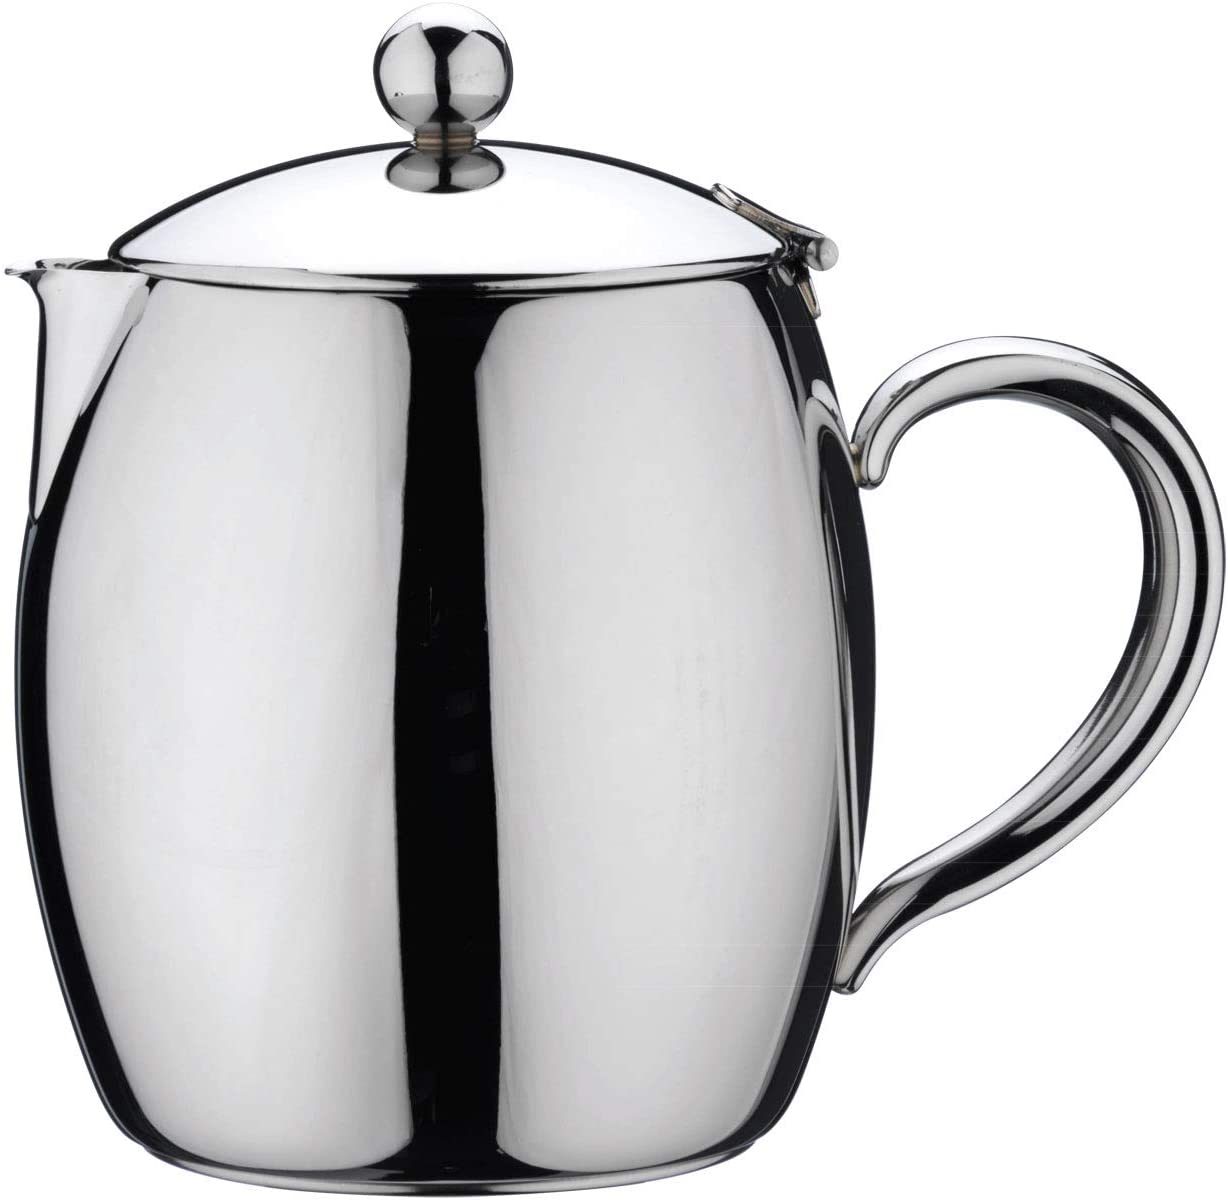 Cafe Stal Café Stål Bellux Collection BTP-05DW Double-Walled Teapot Made of High Quality 18/10 Stainless Steel - High Gloss Polish, 17oz